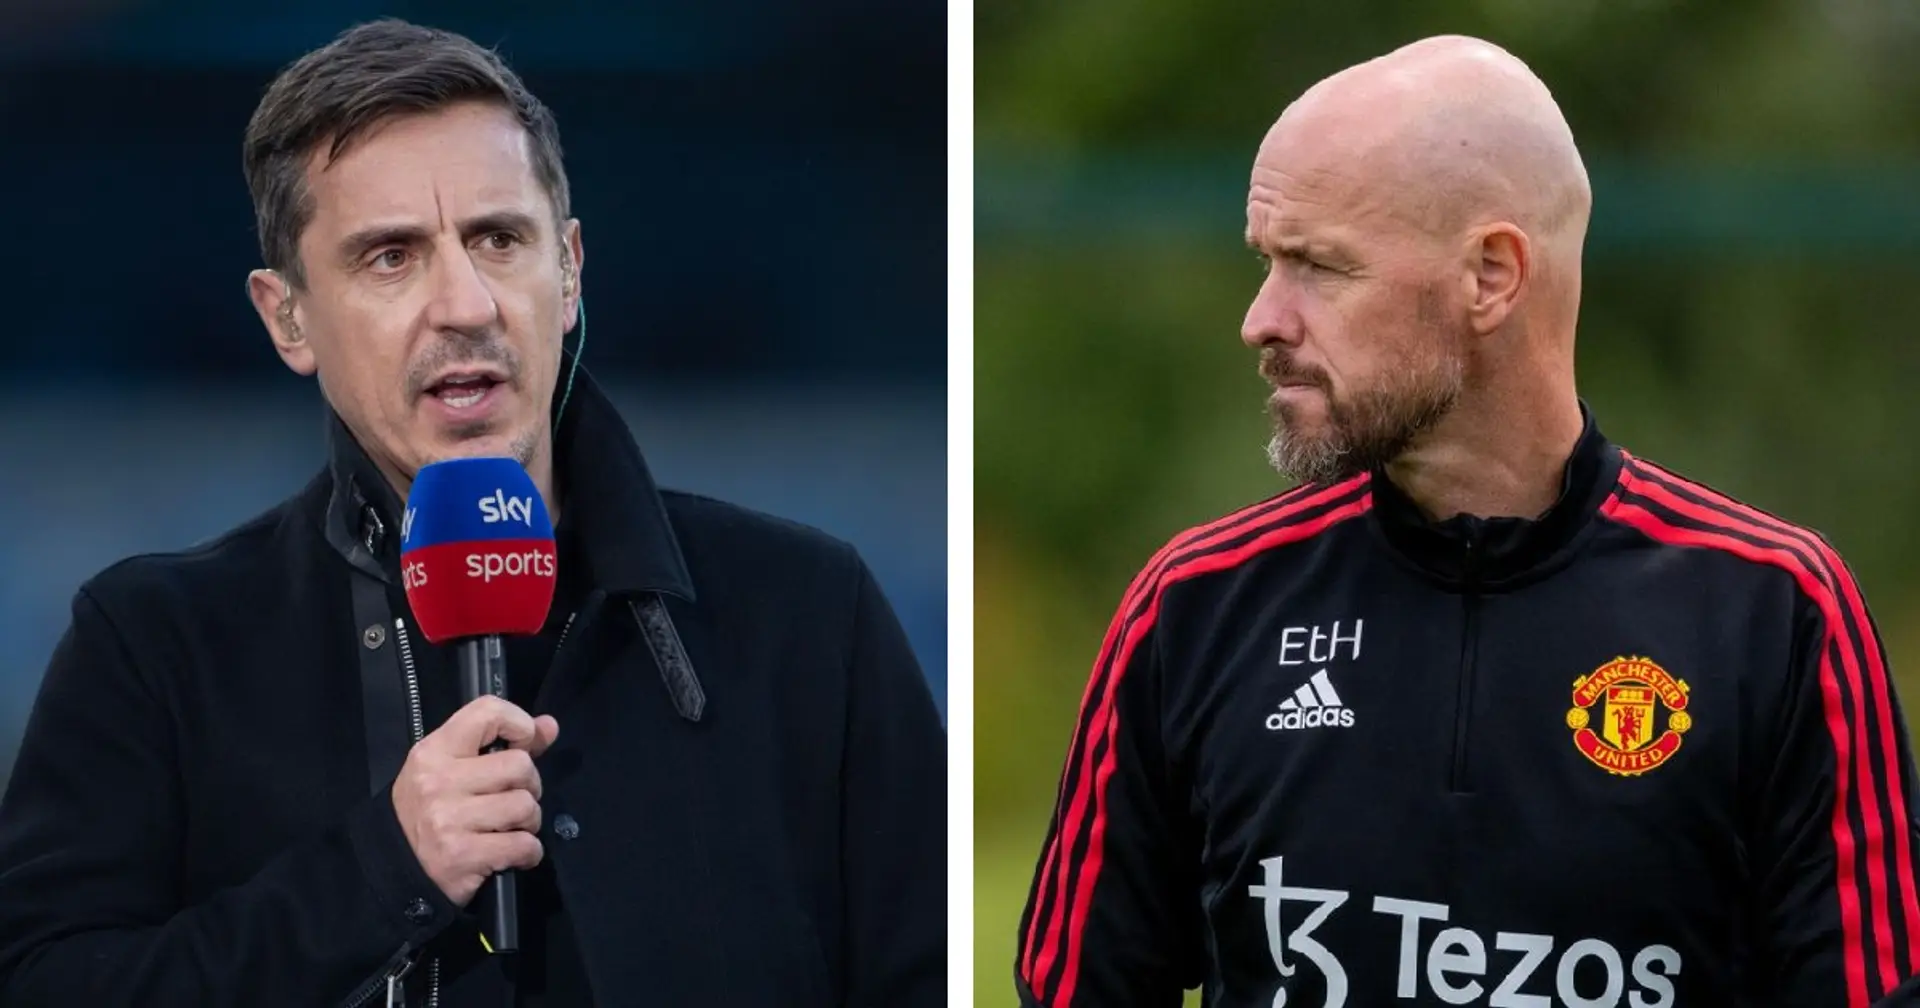 'Discomfort and uncertainty is being created on the inside': Neville names two players that could have negative effect on Man United dressing room